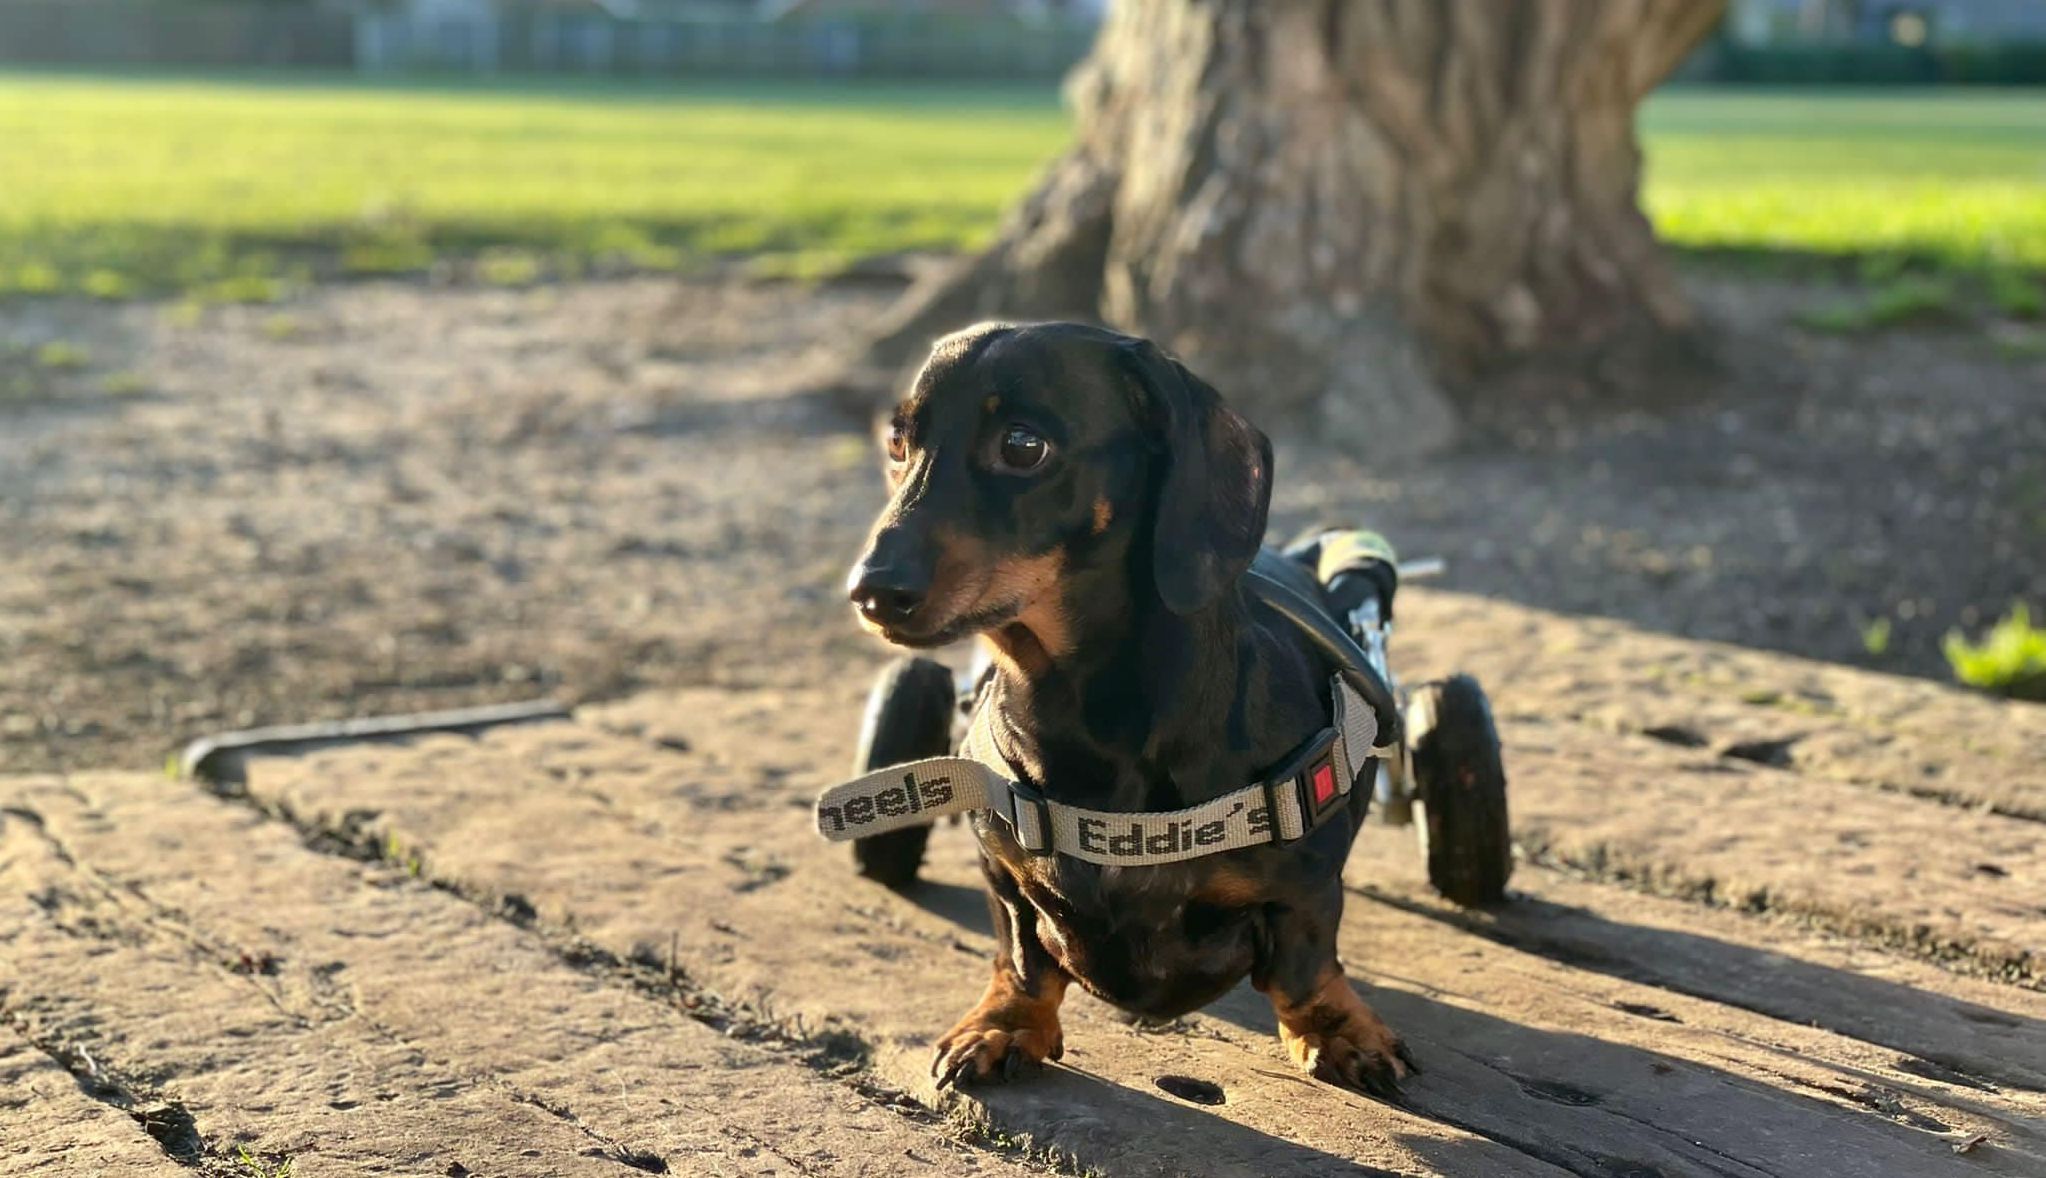 Dennis the Dachsund from Southport